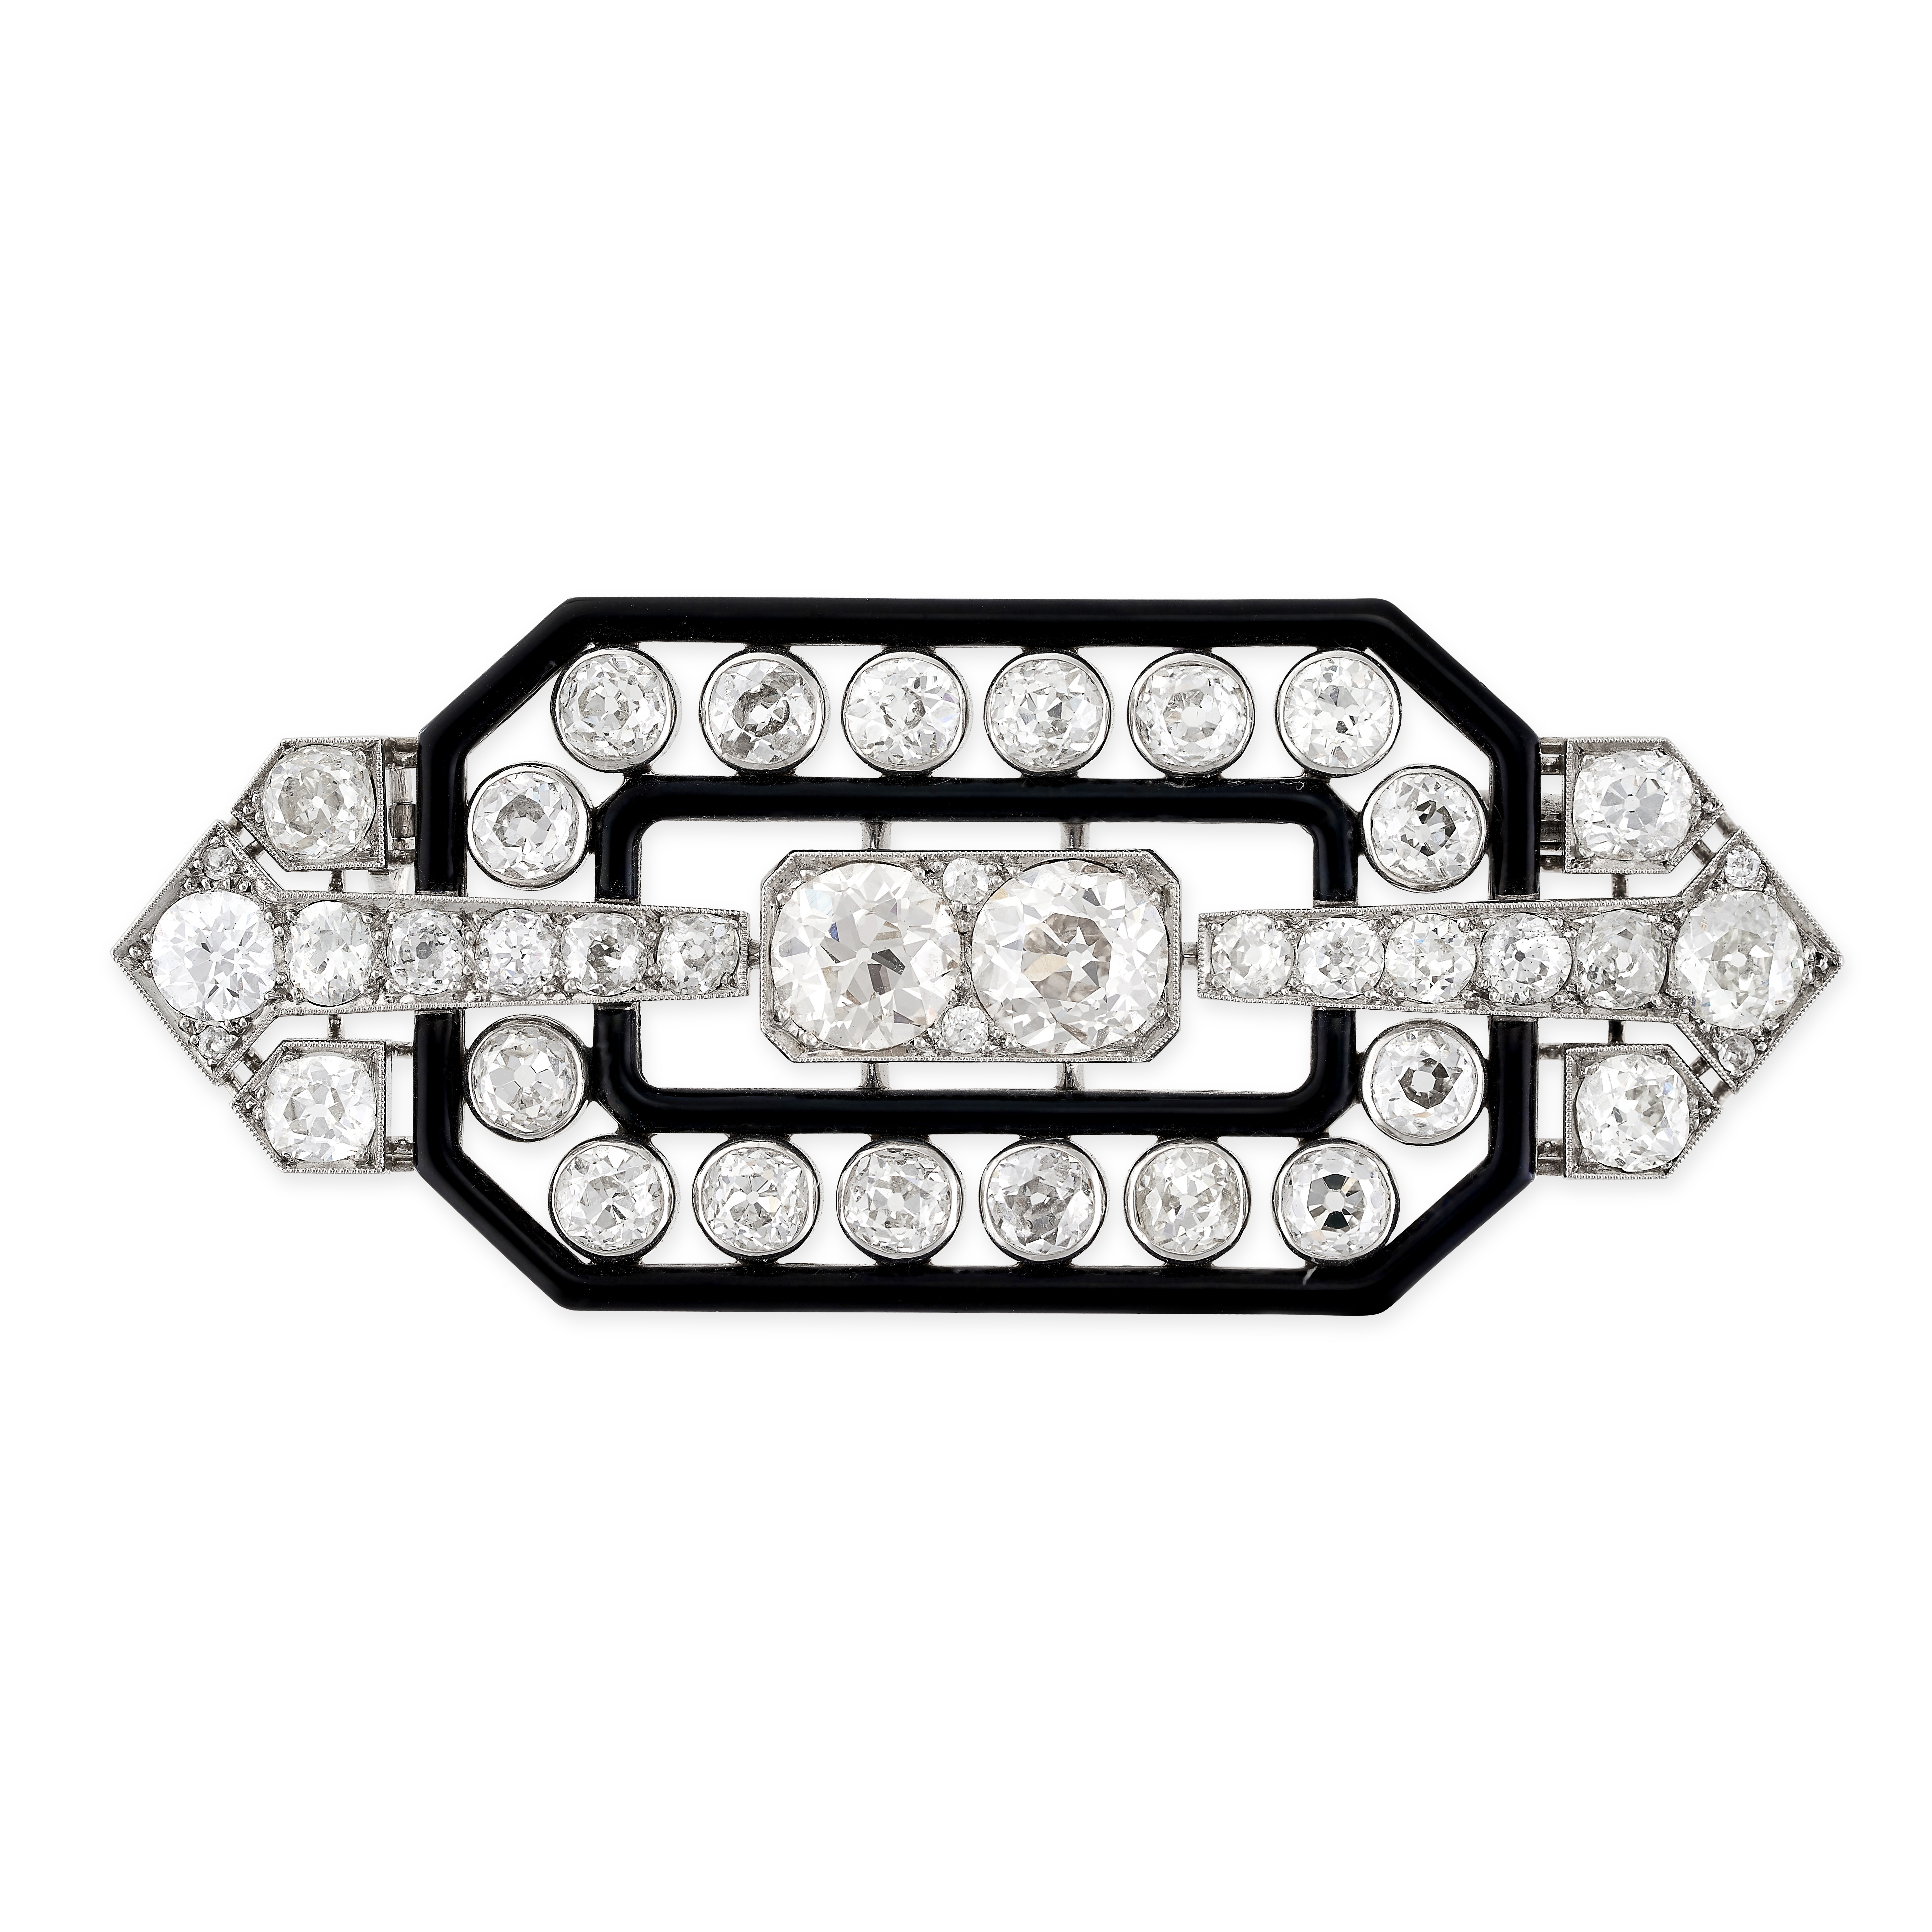 BOUCHERON, AN EXCEPTIONAL ANTIQUE ART DECO DIAMOND AND ENAMEL BROOCH in platinum and 18ct white